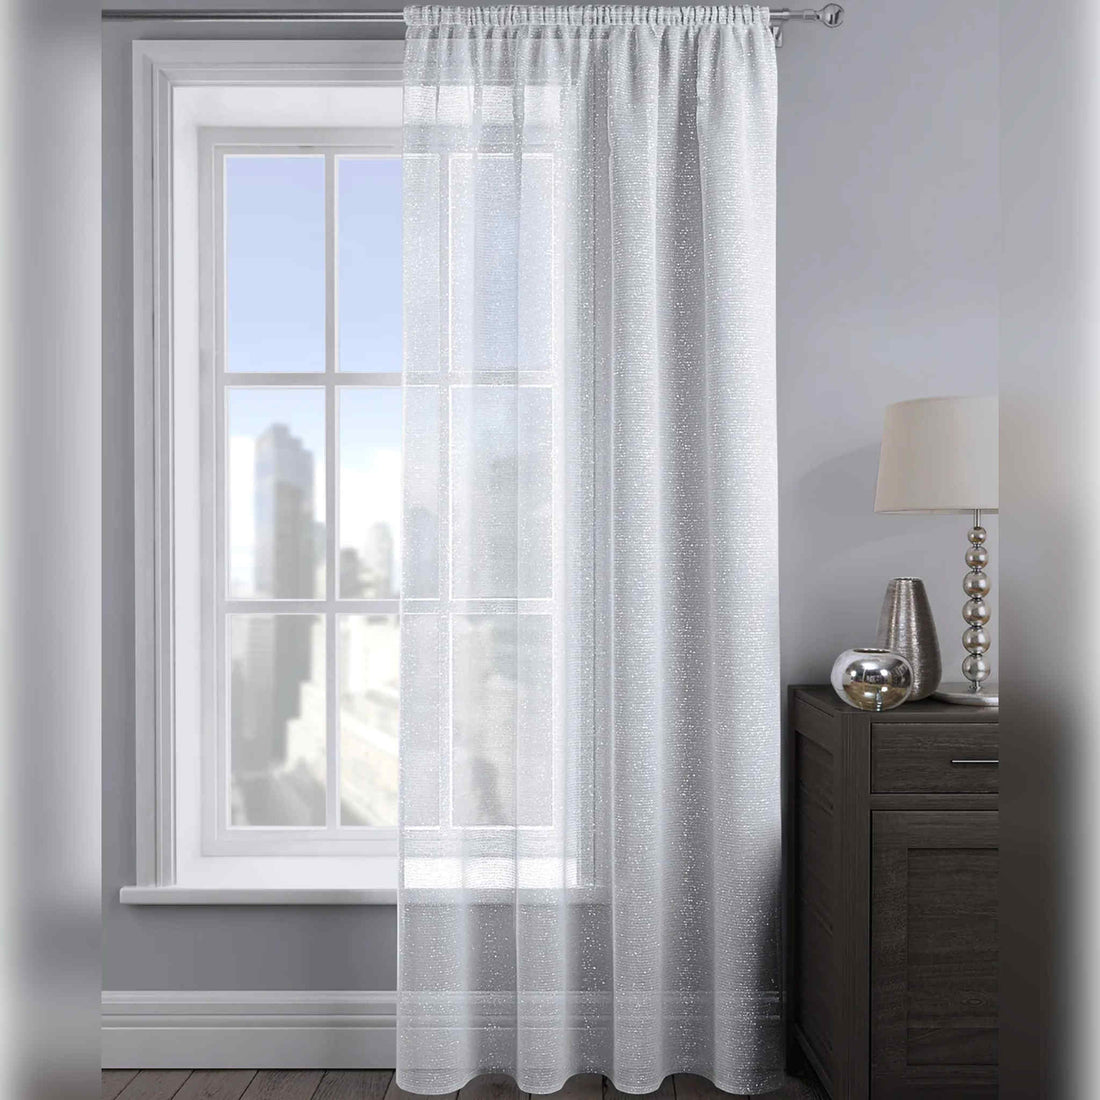 Velosso Alessandria Voile Panels Tape Top Curtains | 54x90in